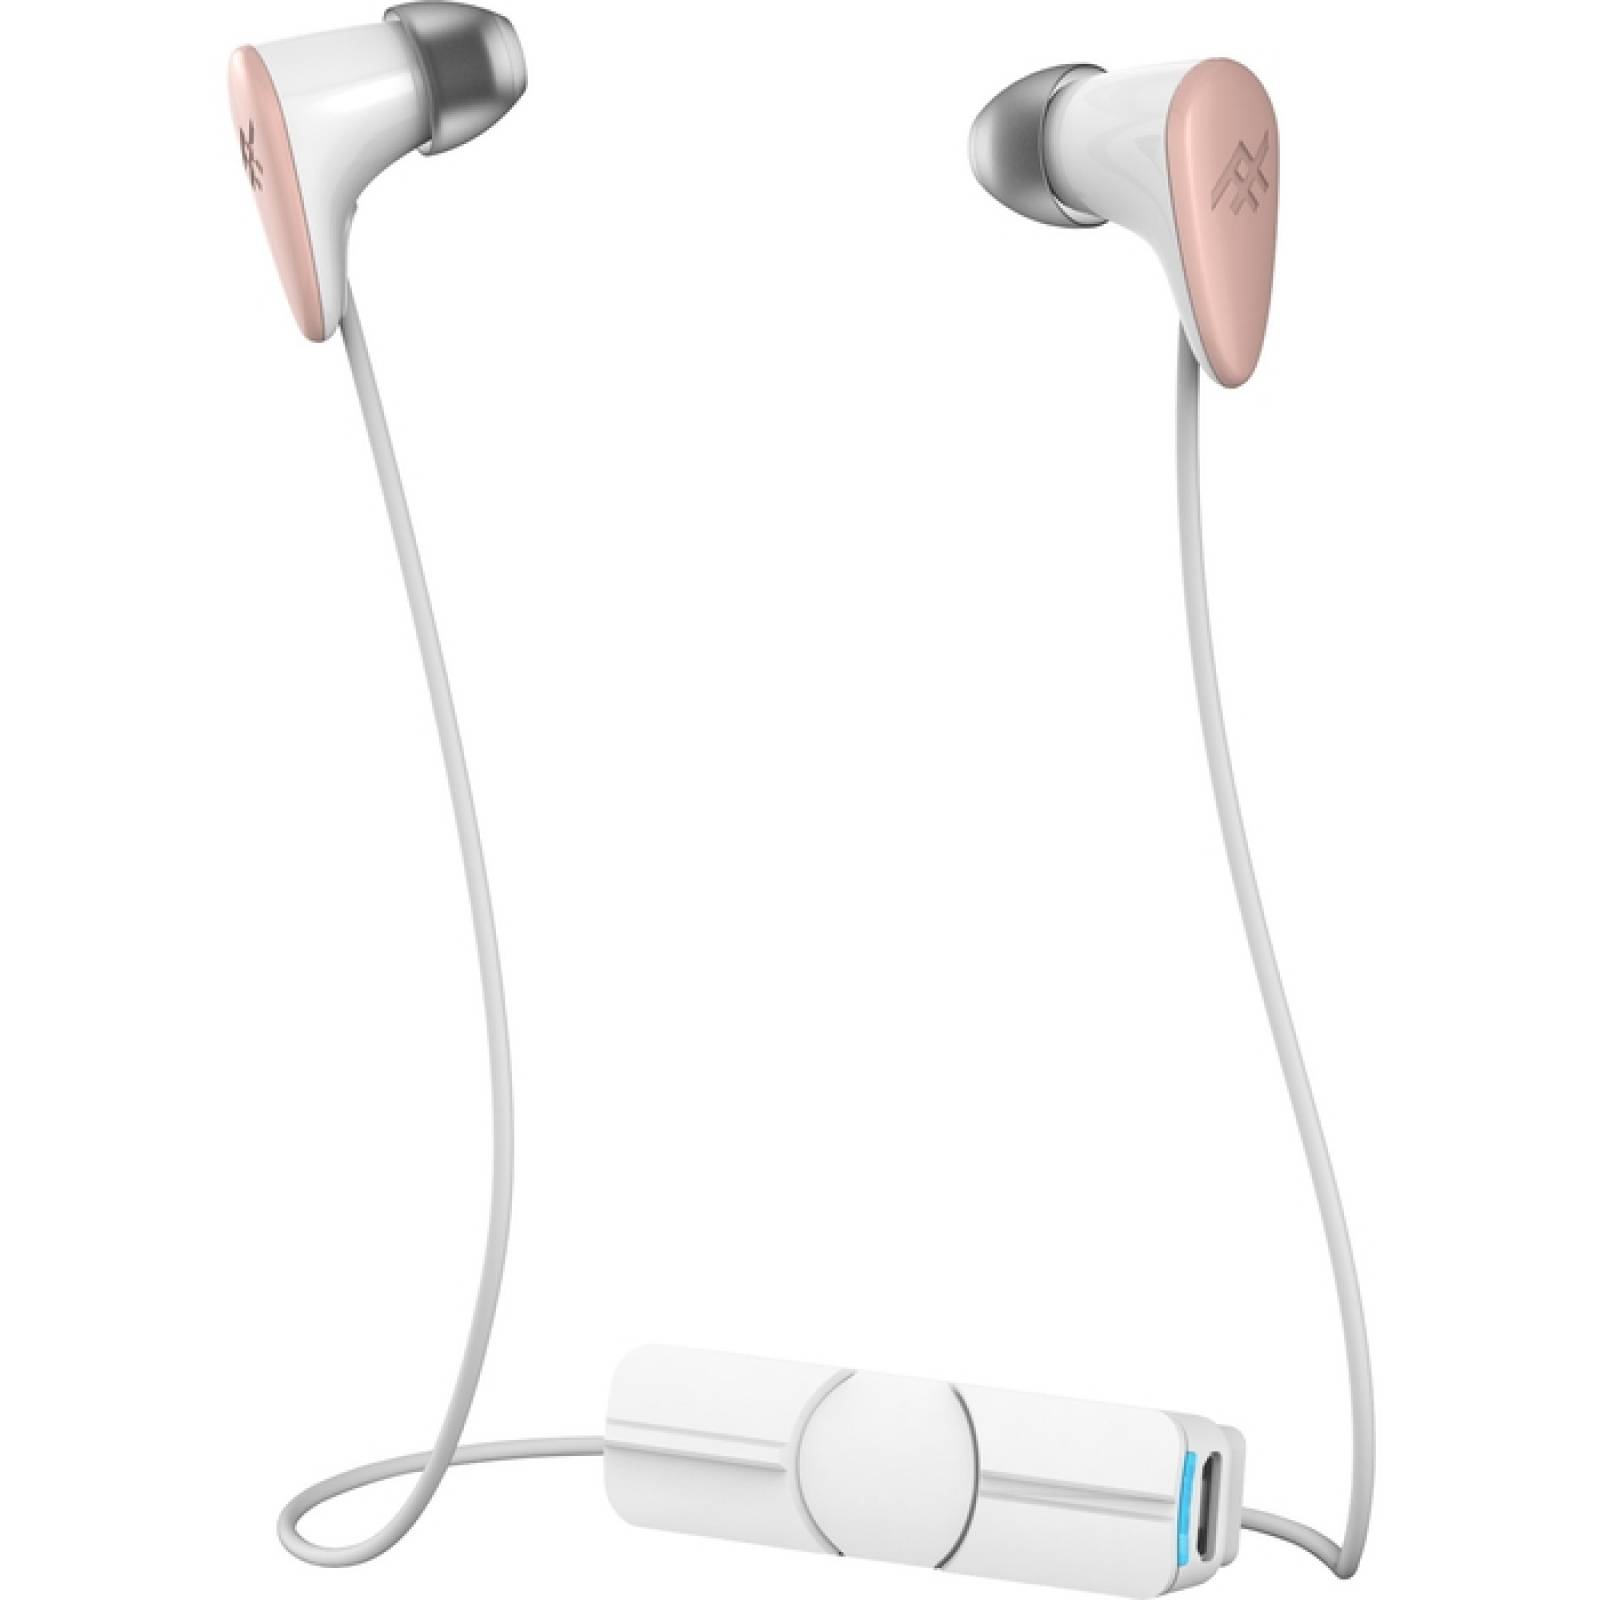 IFROGZ AUDIO CHARISMA WRLS  EARBUDS WHITE  ROSE GOLD